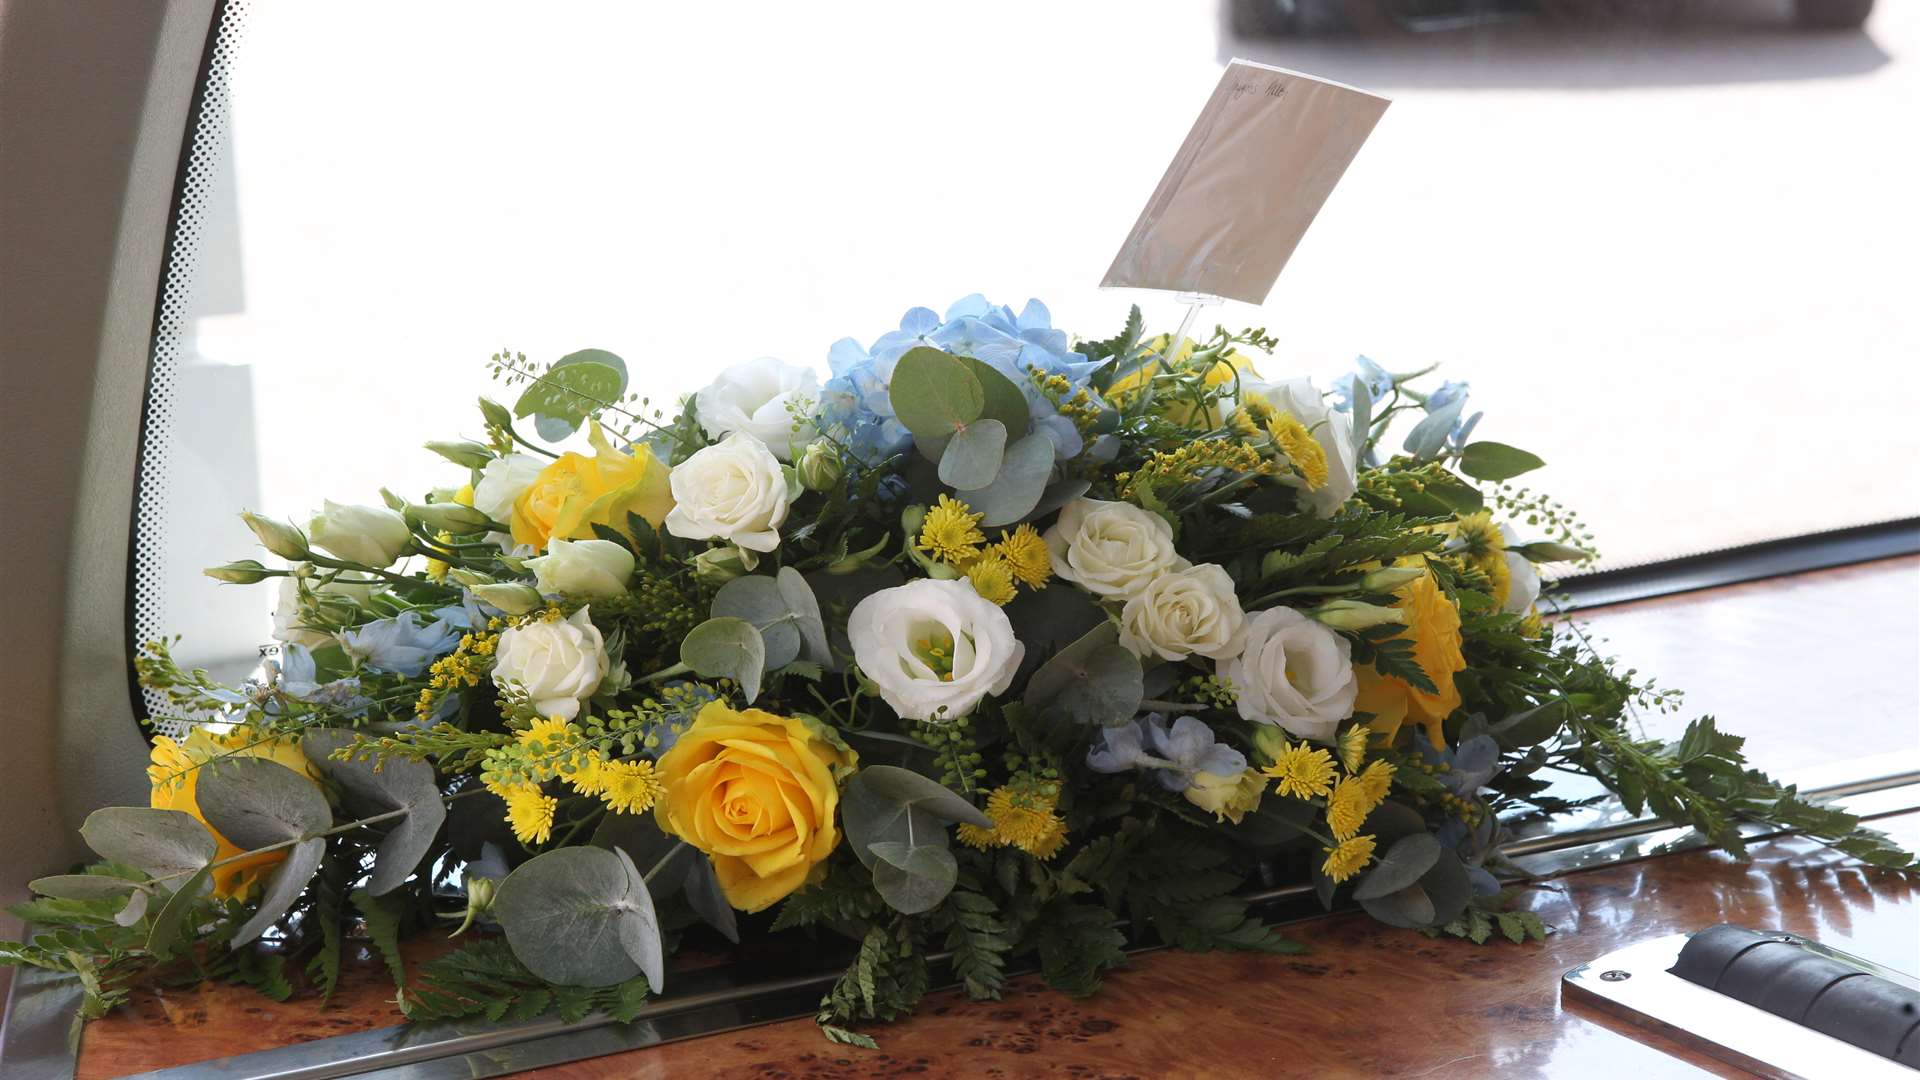 The flowers at the funeral of Douglas Allen